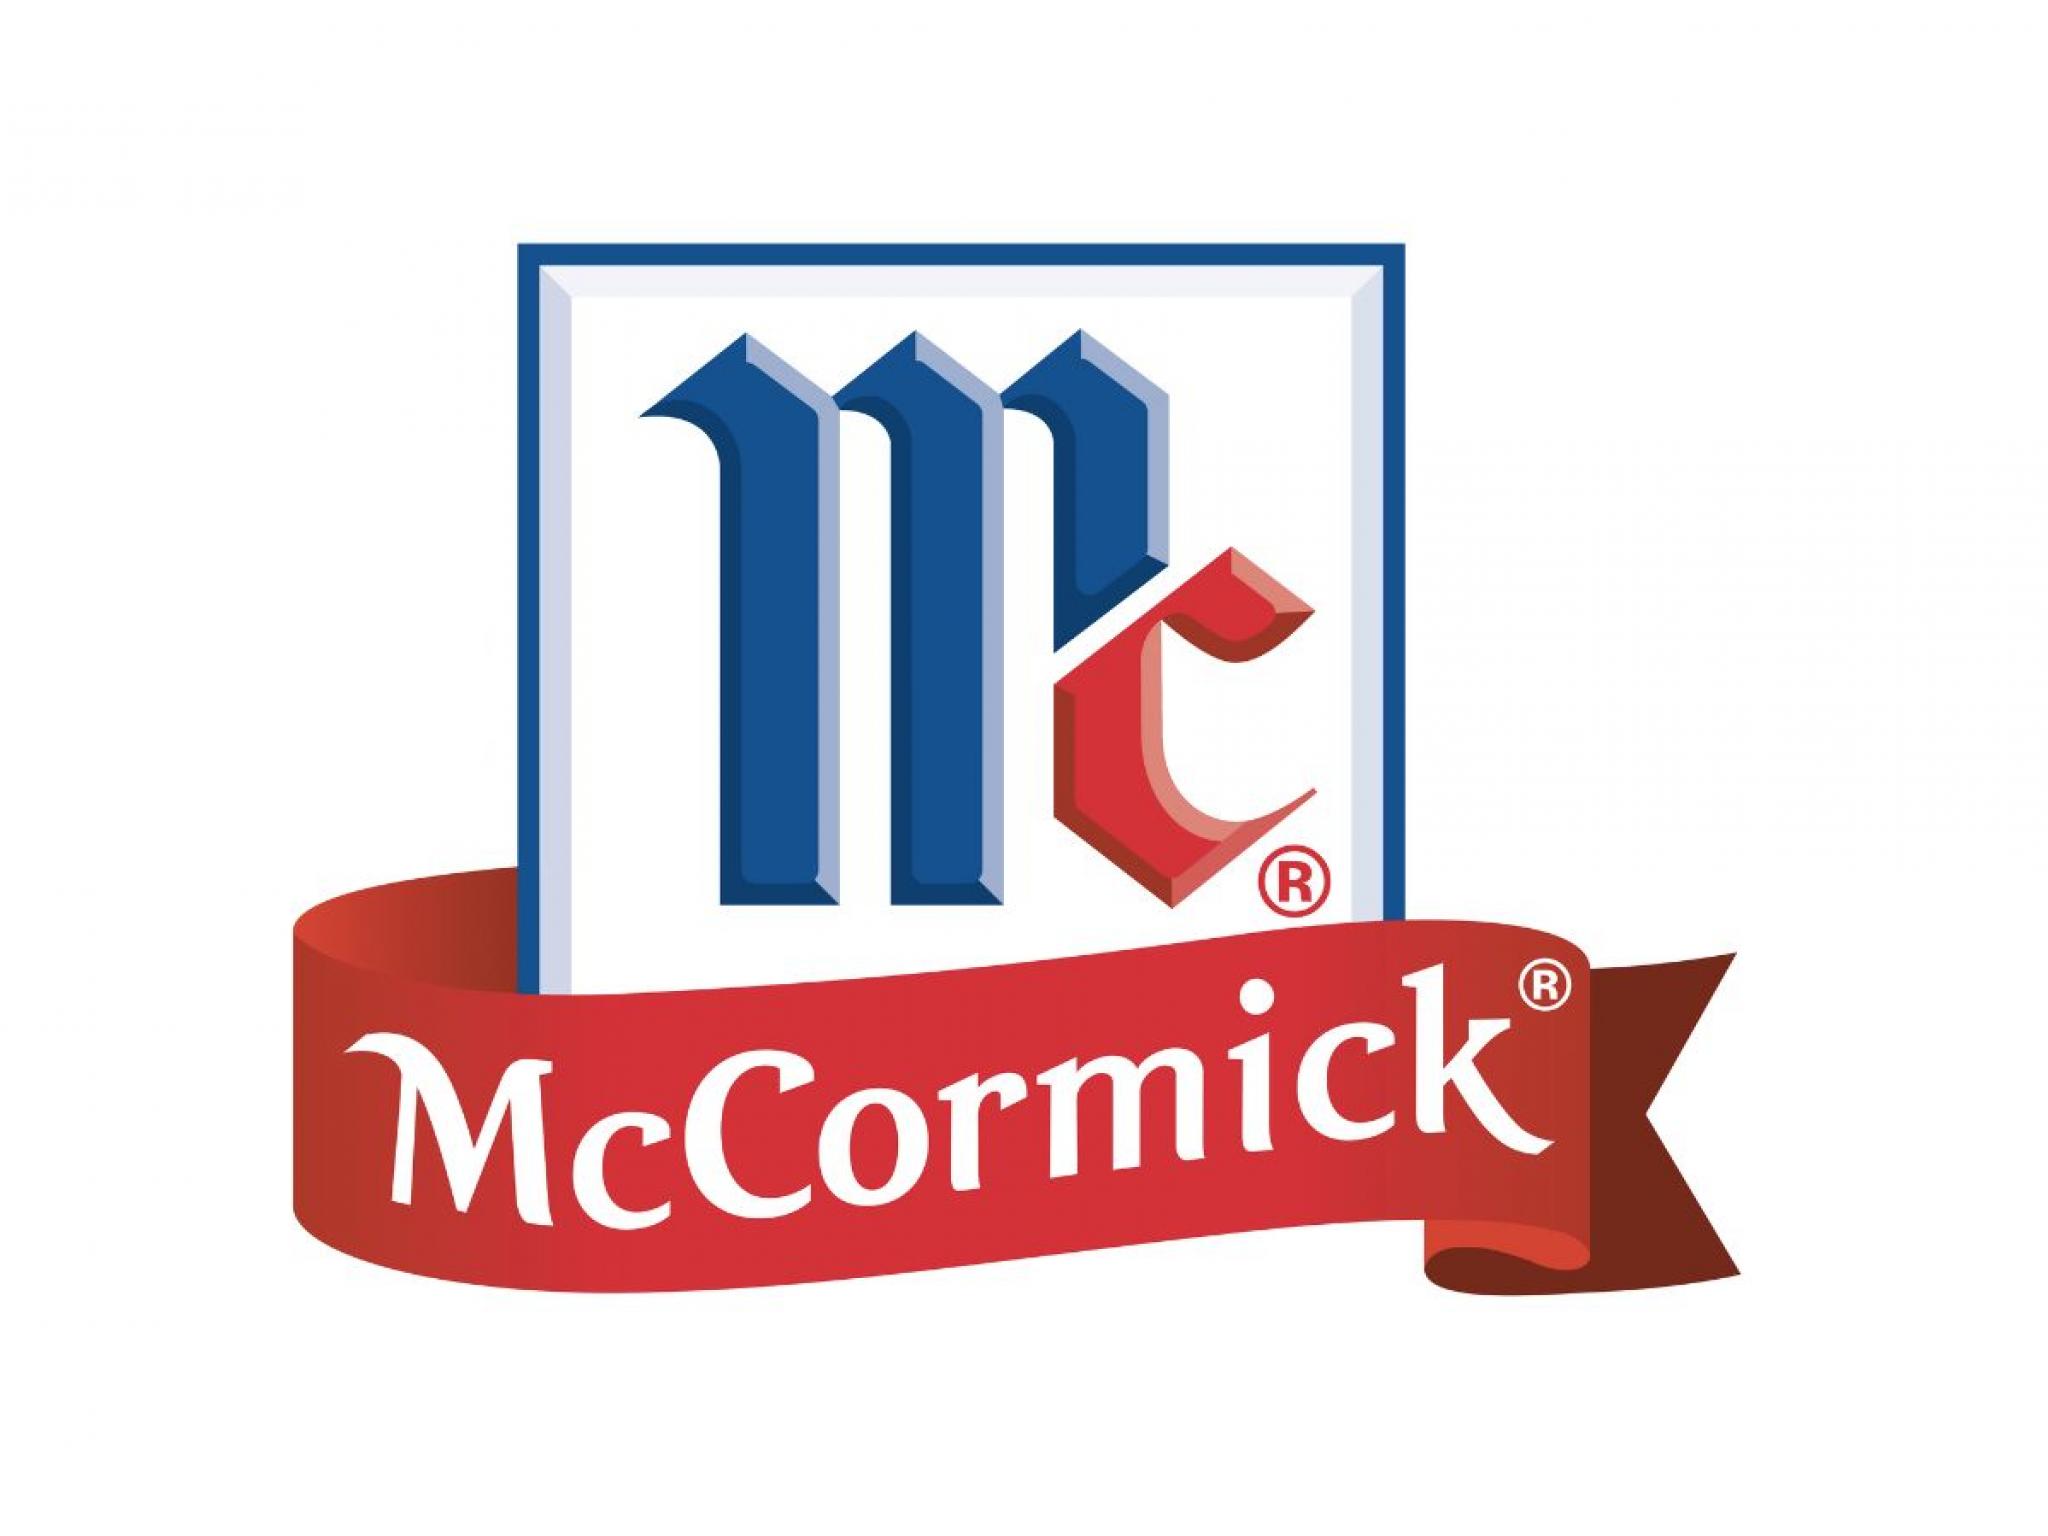  mccormick-delta-apparel-and-3-stocks-to-watch-heading-into-tuesday 